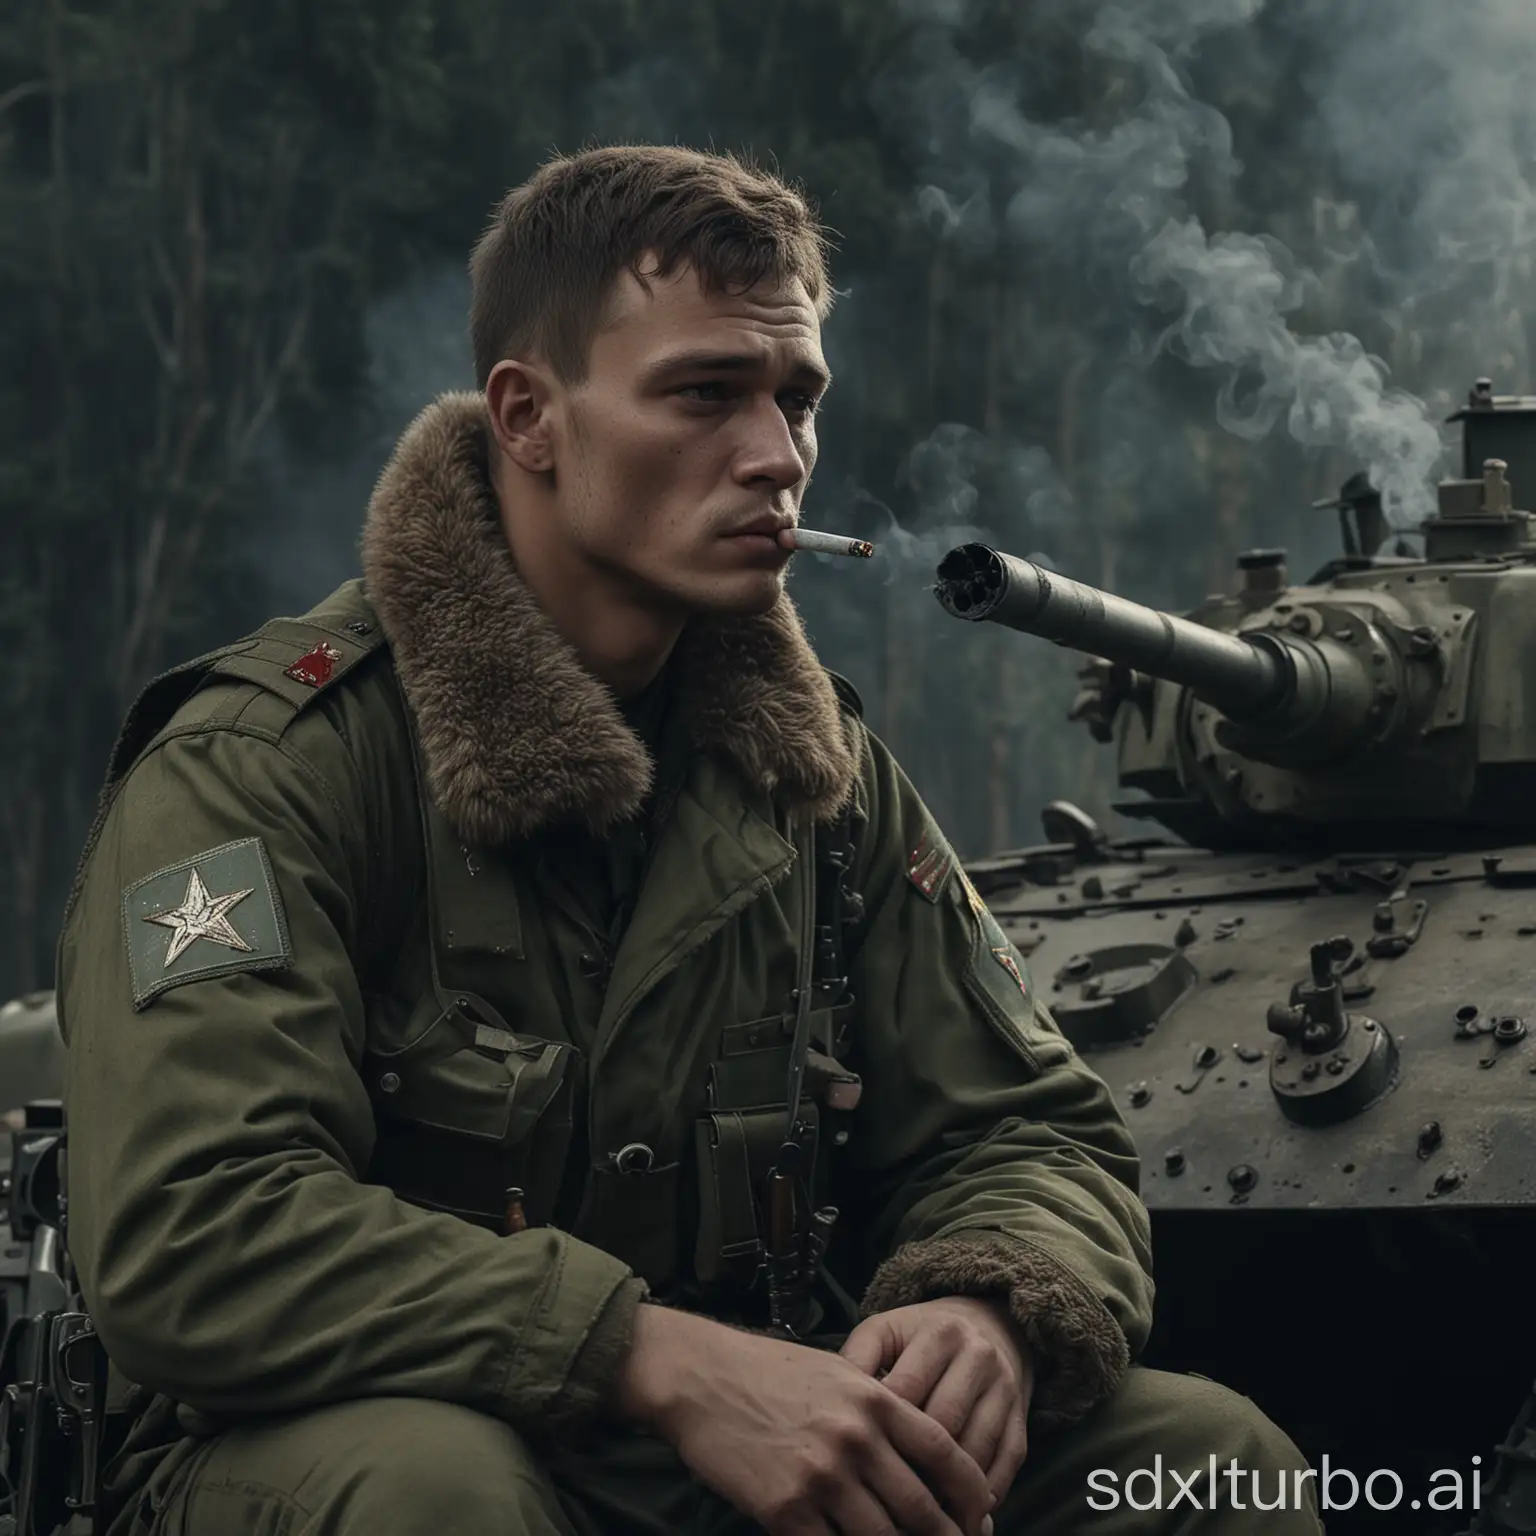 Russian-Soldier-Smoking-on-Tank-Cinematic-4K-Image-with-Dark-Aesthetic